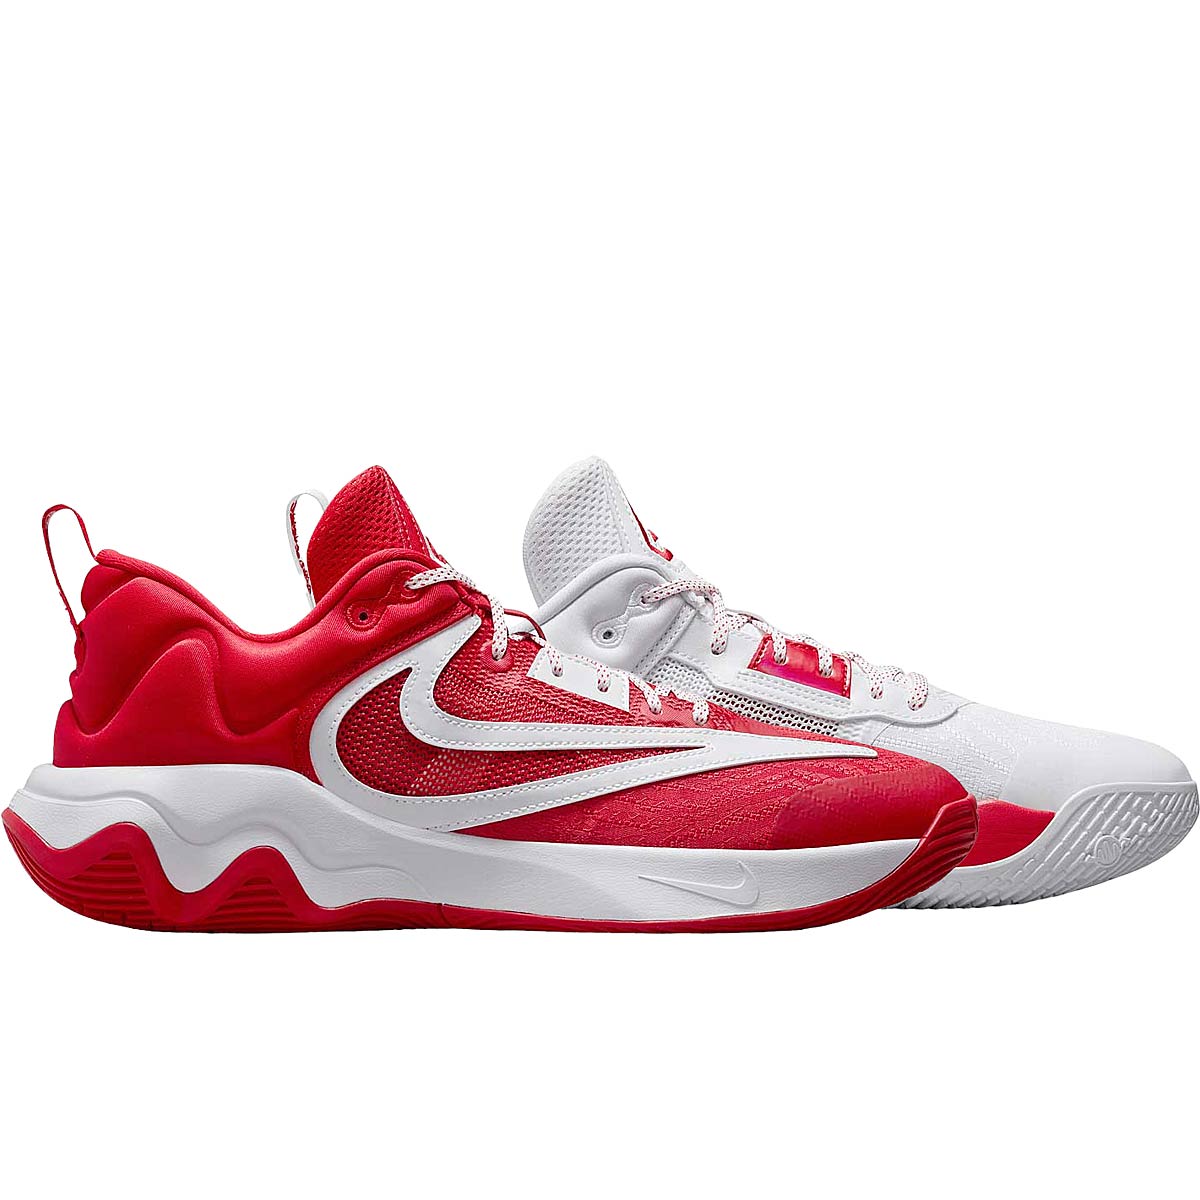 Nike Giannis Immortality 3 All-star Weekend, University Red/white EU47 1/2